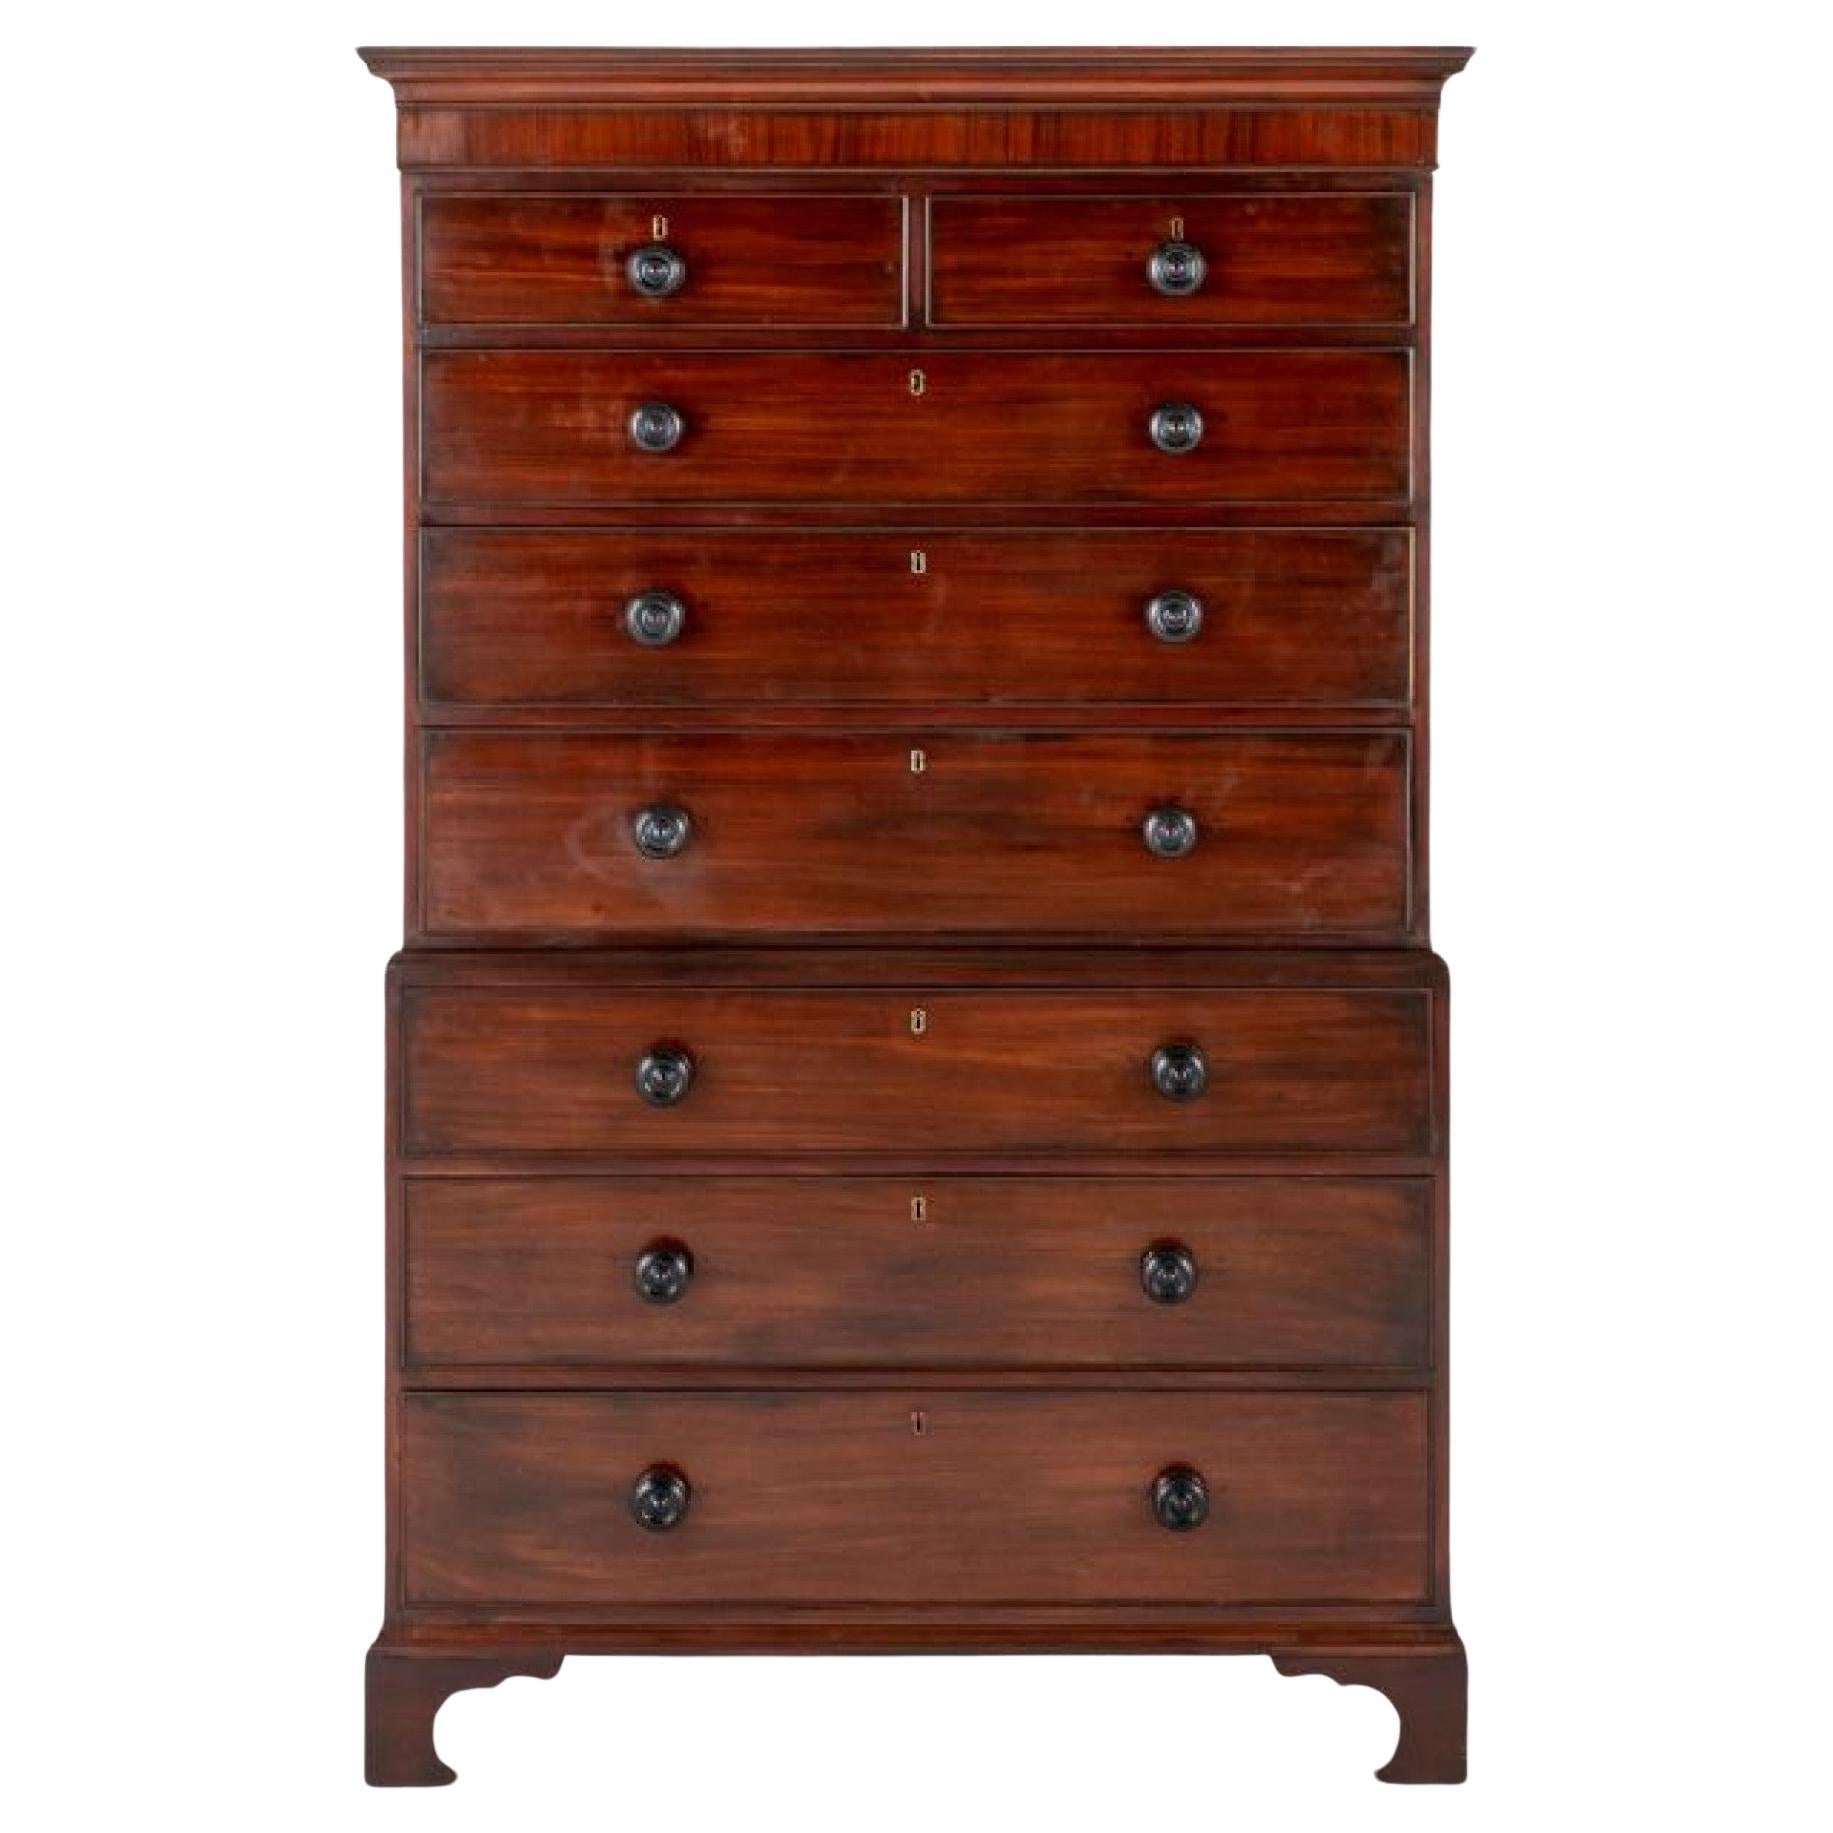 Georgian Chest on Chest Mahogany Period Furniture For Sale